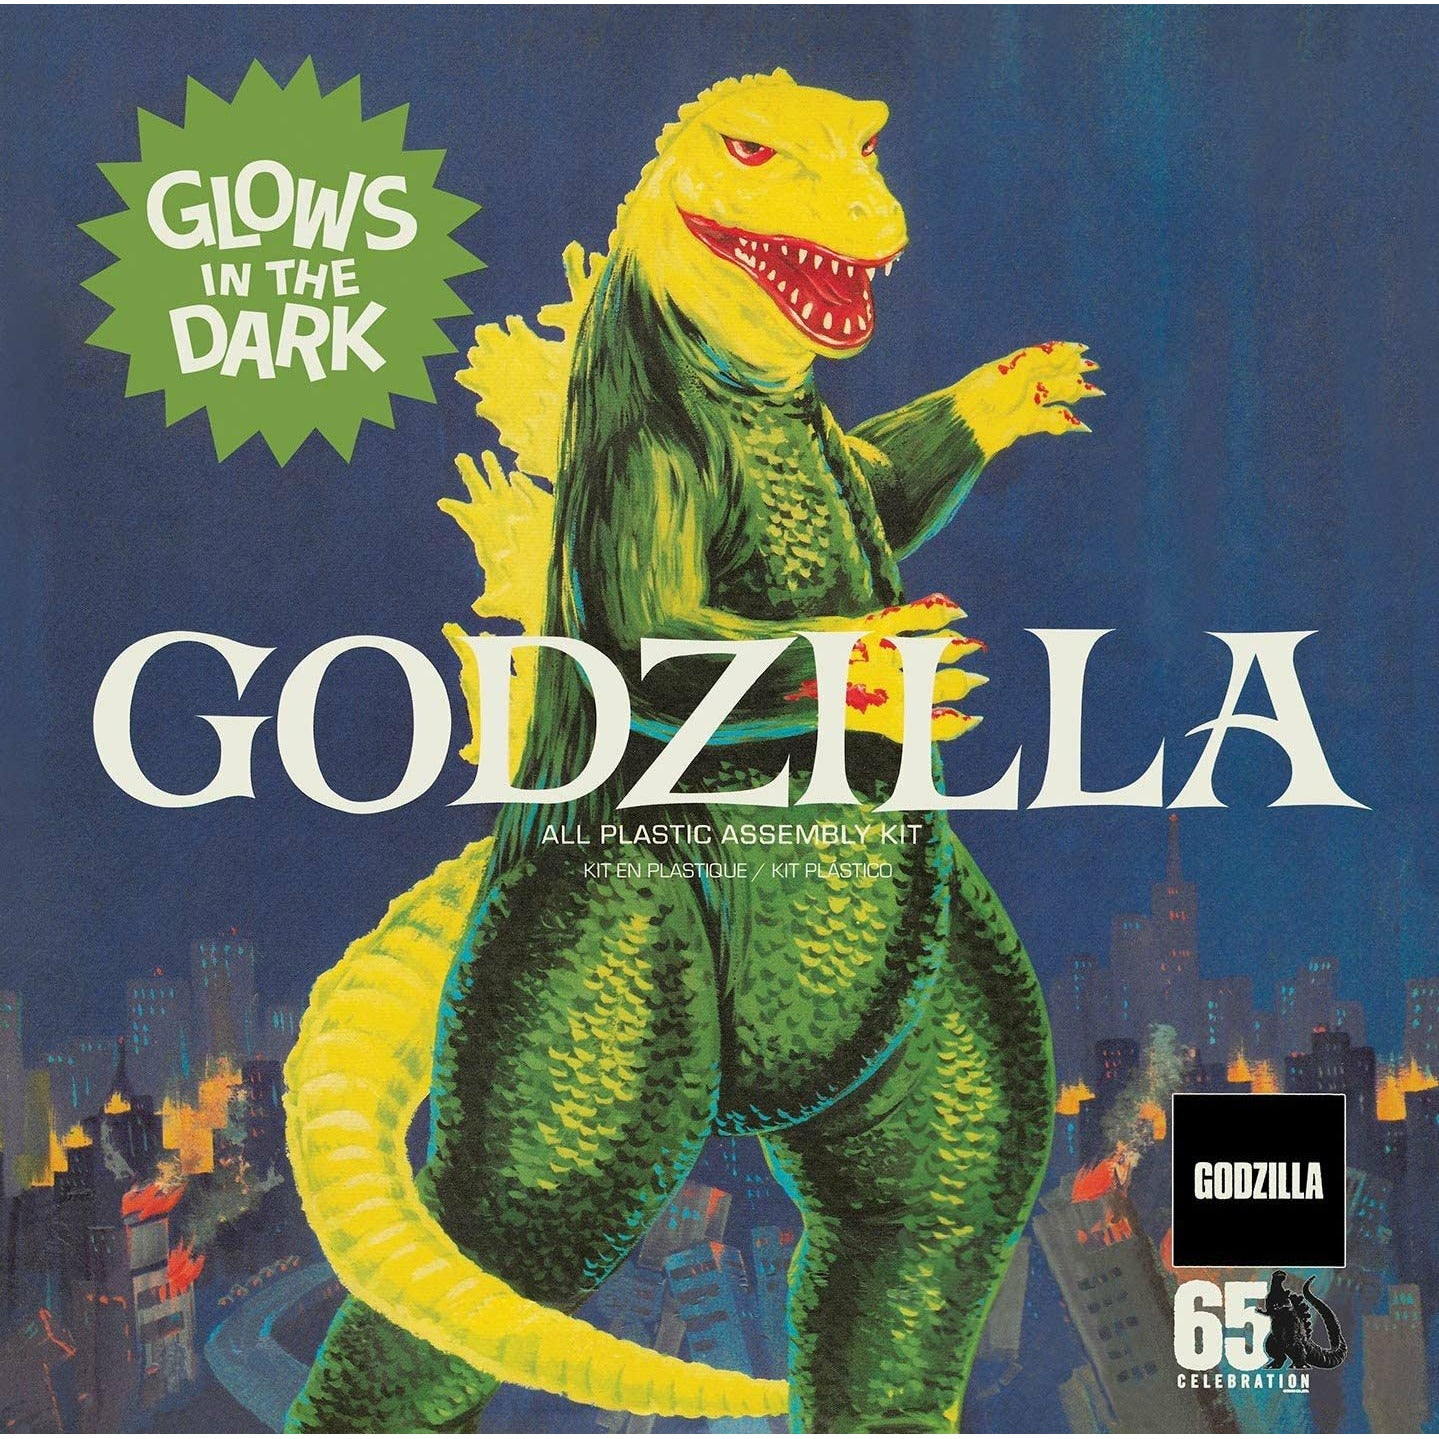 Godzilla, King of Monsters Glow in the Dark Edition #466 by Atlantis